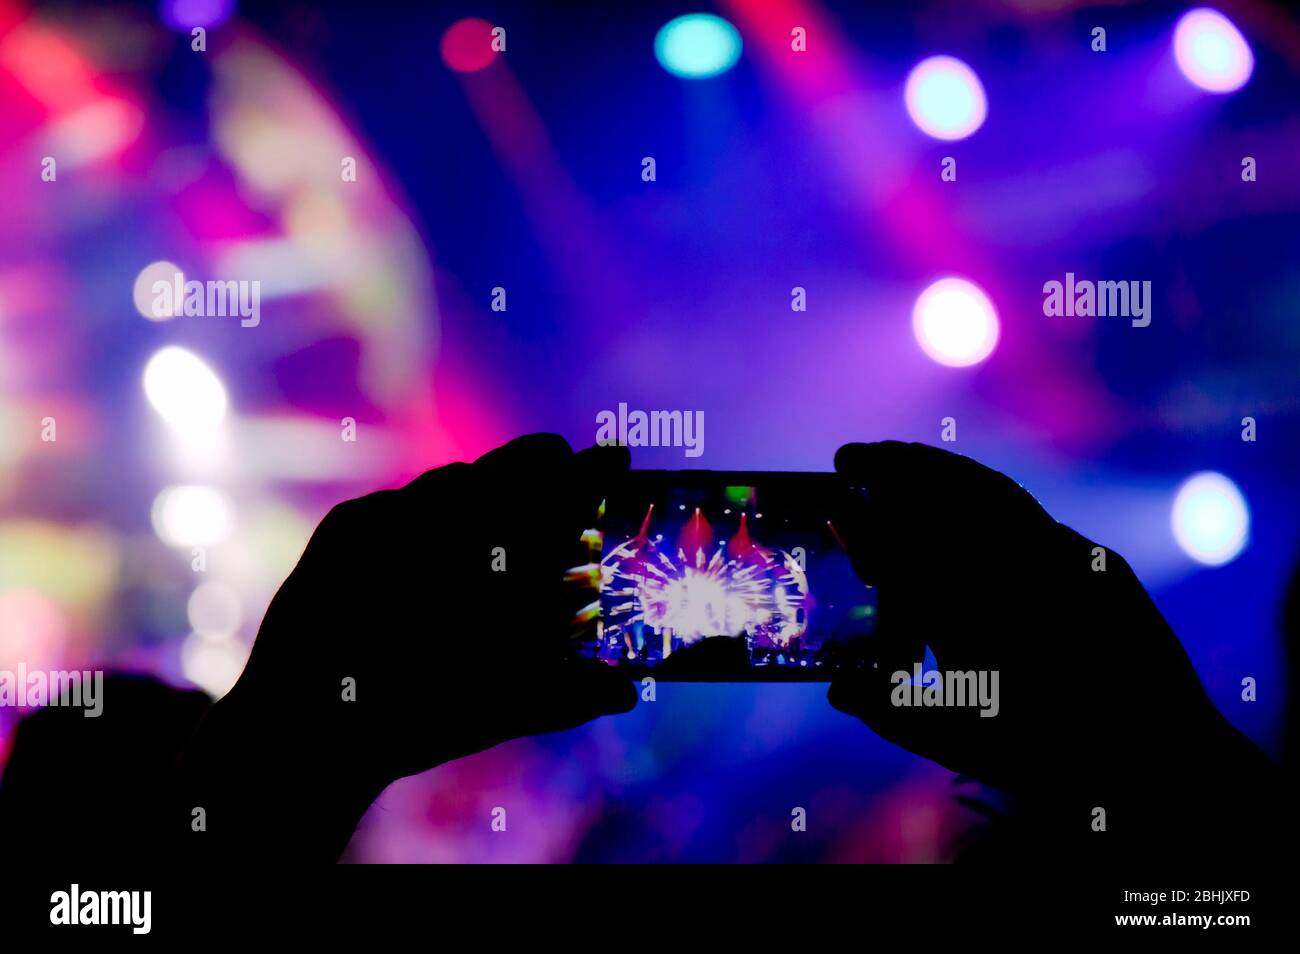 Collecting digital memory is loosing capability of being present, silhouette of a person shooting the concert stage light effects with  smart phone Stock Photo